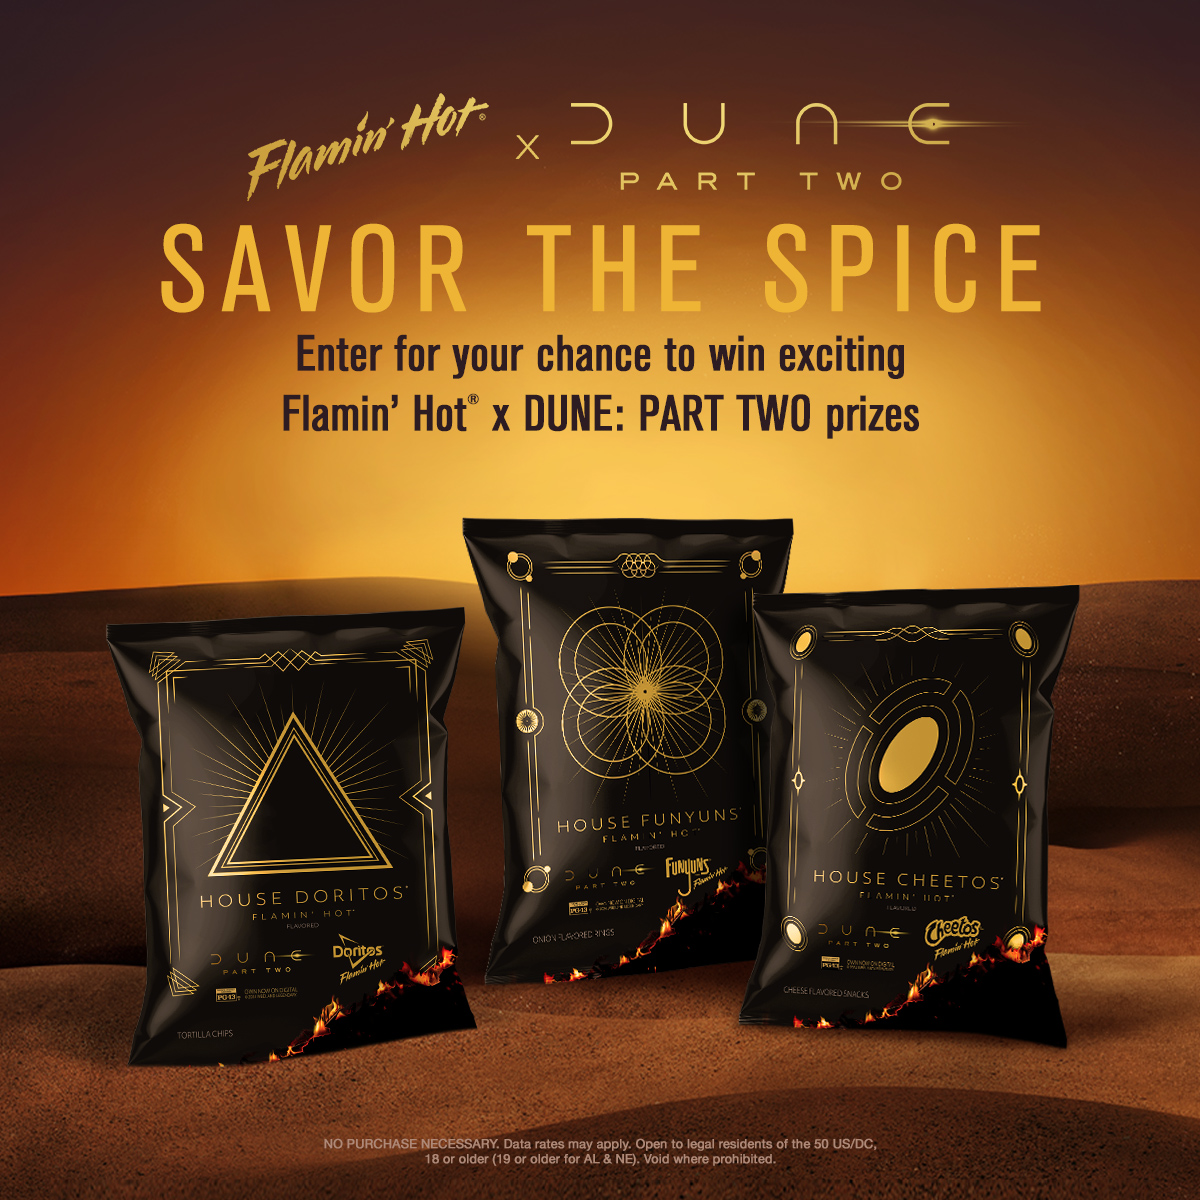 Enter For Your Chance To Win Exciting Flamin’ Hot® x DUNE: PART TWO Prizes